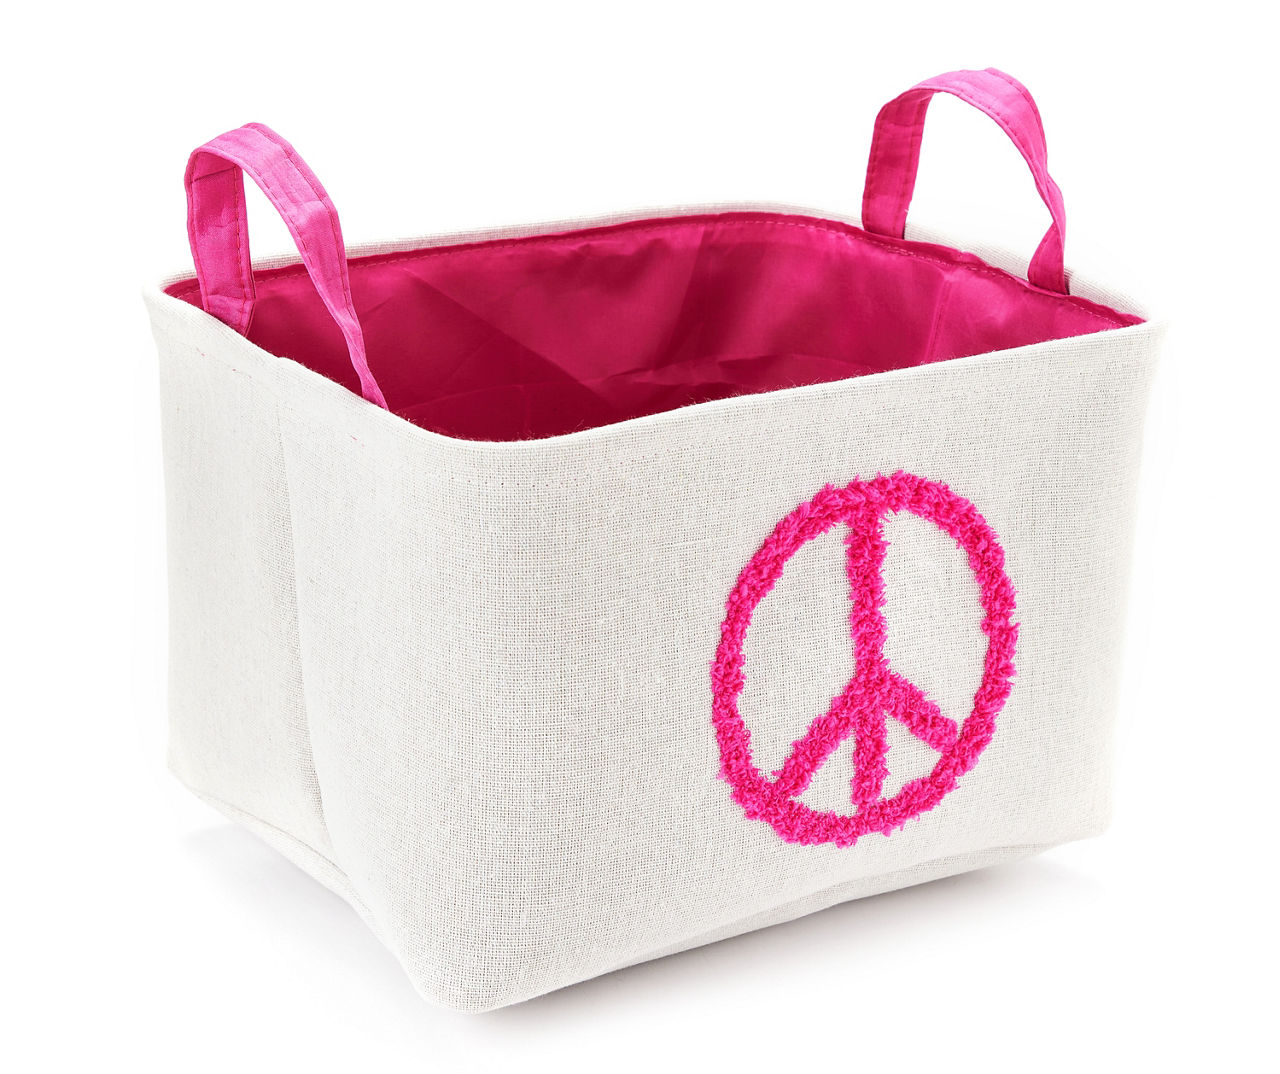 East-West Bag Grey Camouflage with Rose Gold Jumbo Peace Sign